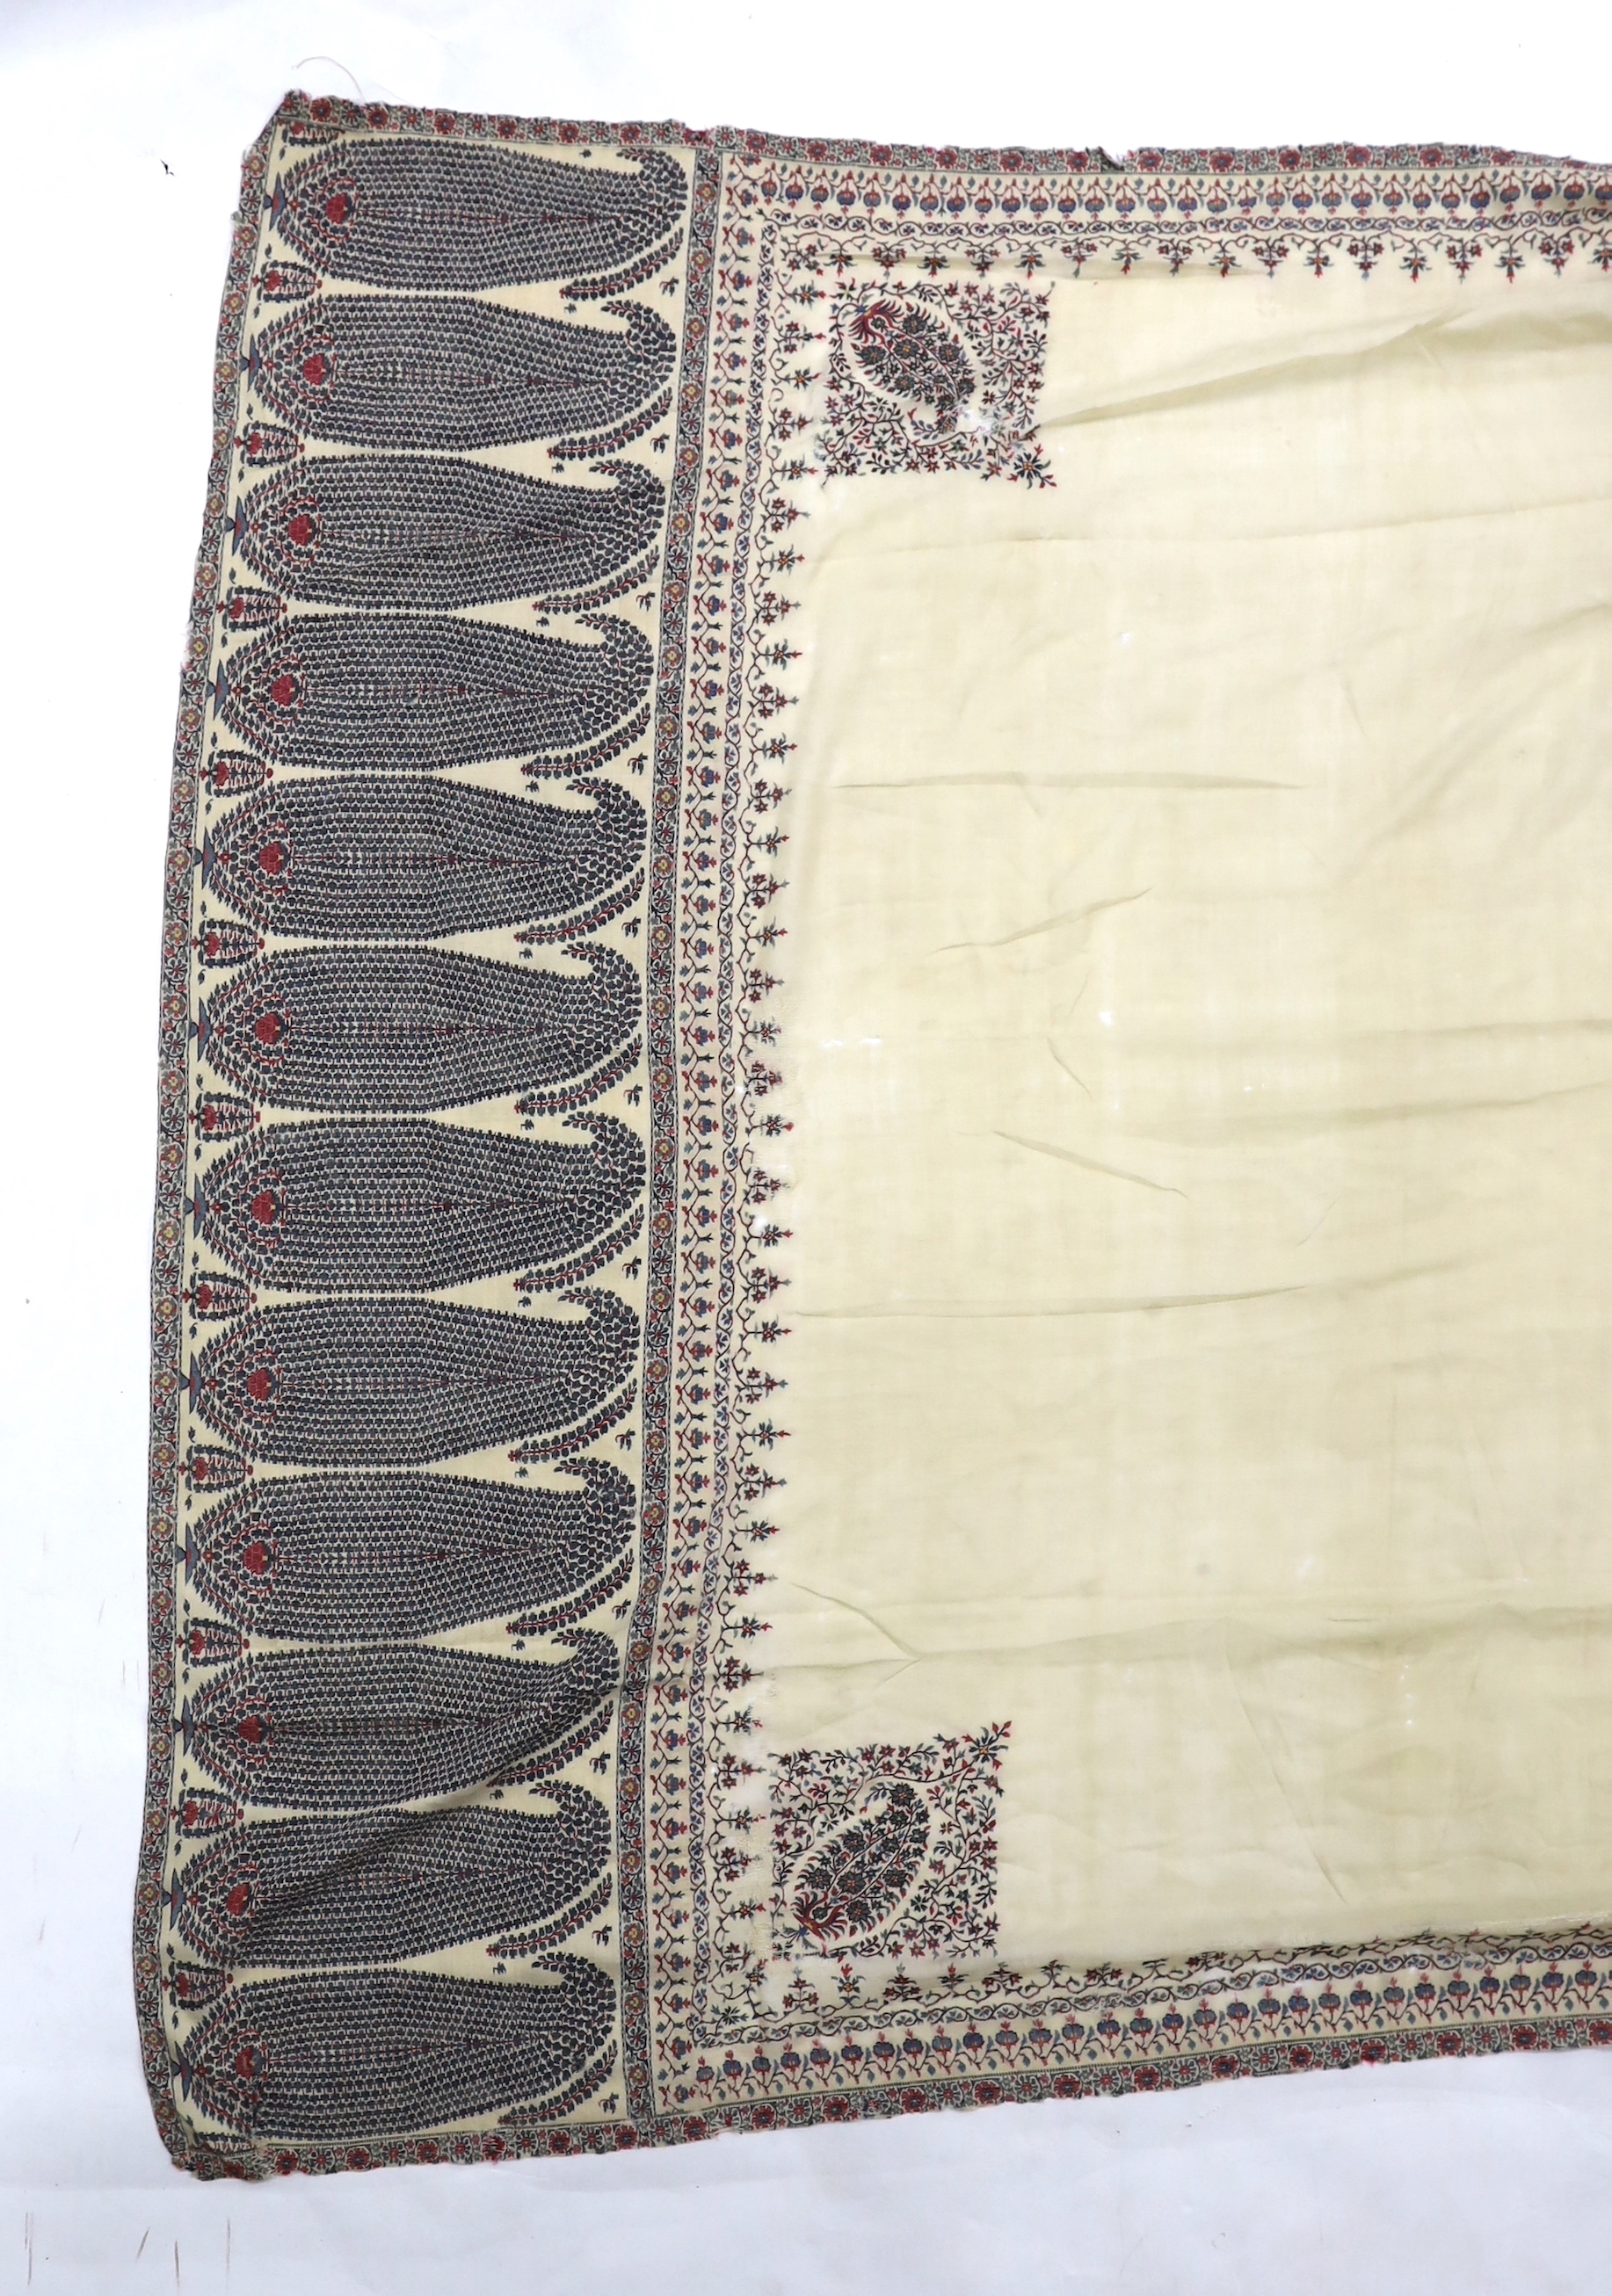 A 19th century fine cream woven Kashmiri shawl with blue and red teardrop design borders, an early 20th century gold satin pelmet with spot motifs of peacocks and flowers, 204cm long x 71cm high and a length of silk with